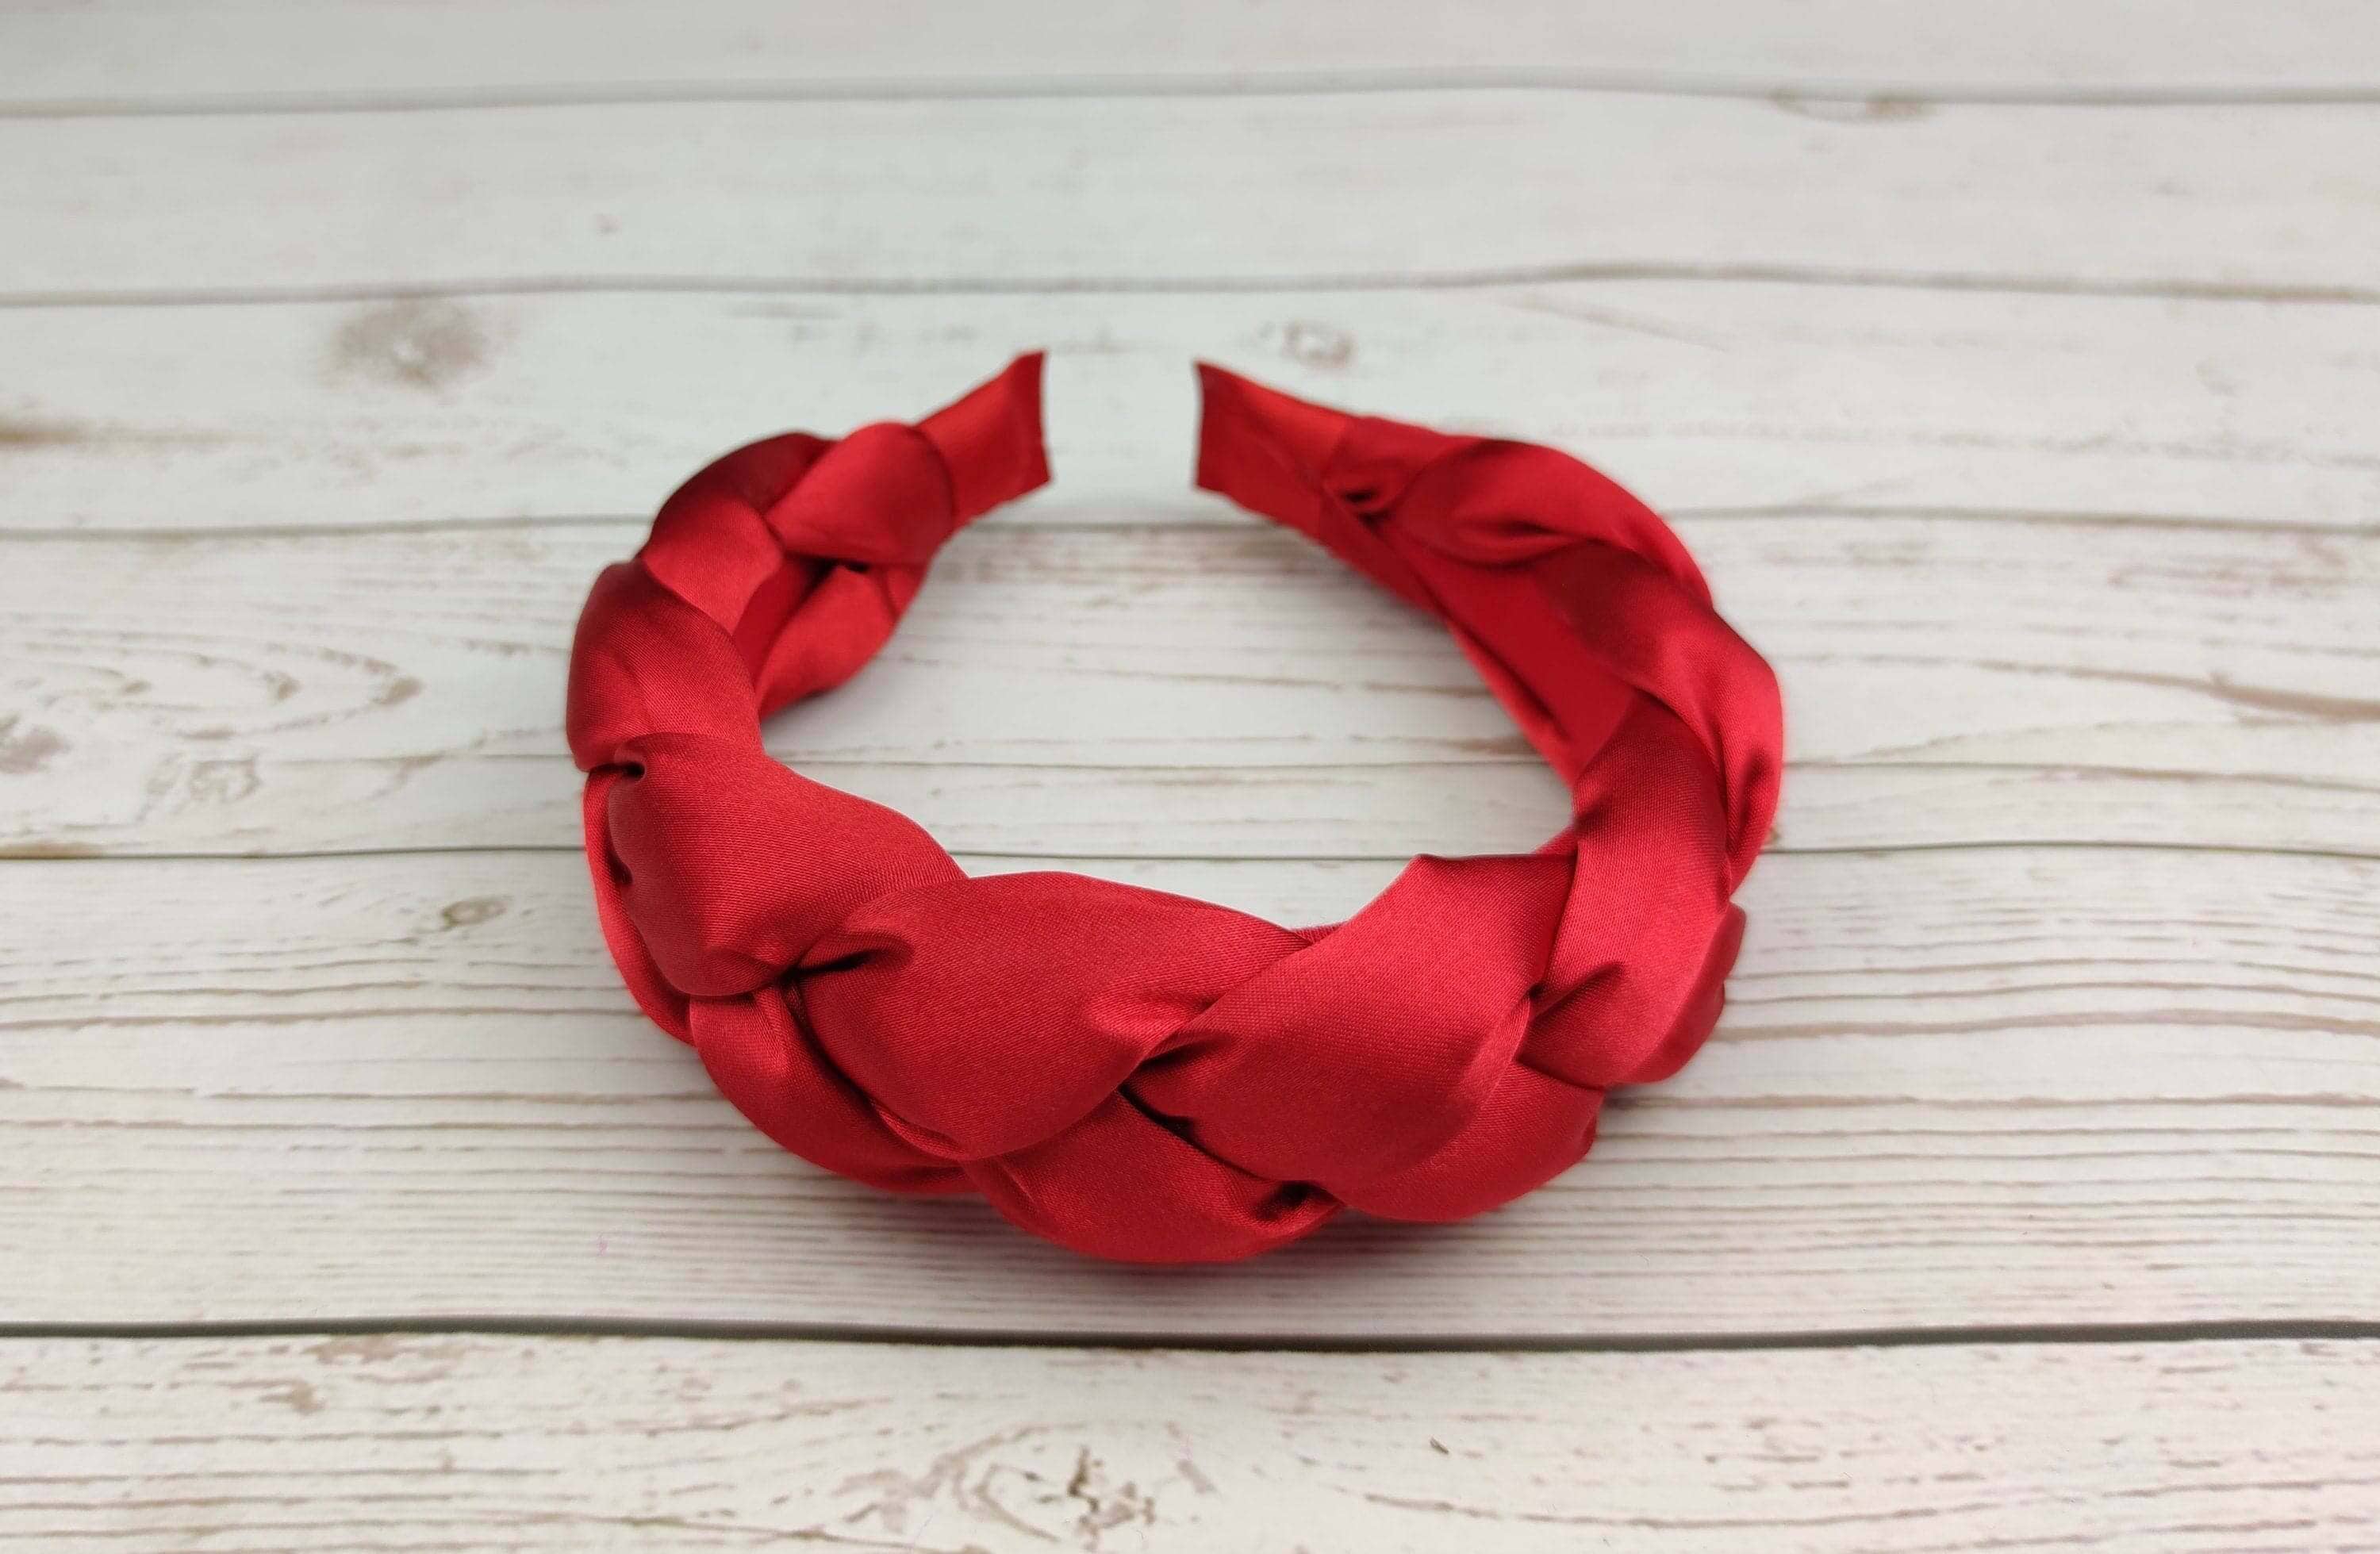 Stay stylish and comfortable with this padded red satin headband, featuring a braided design.